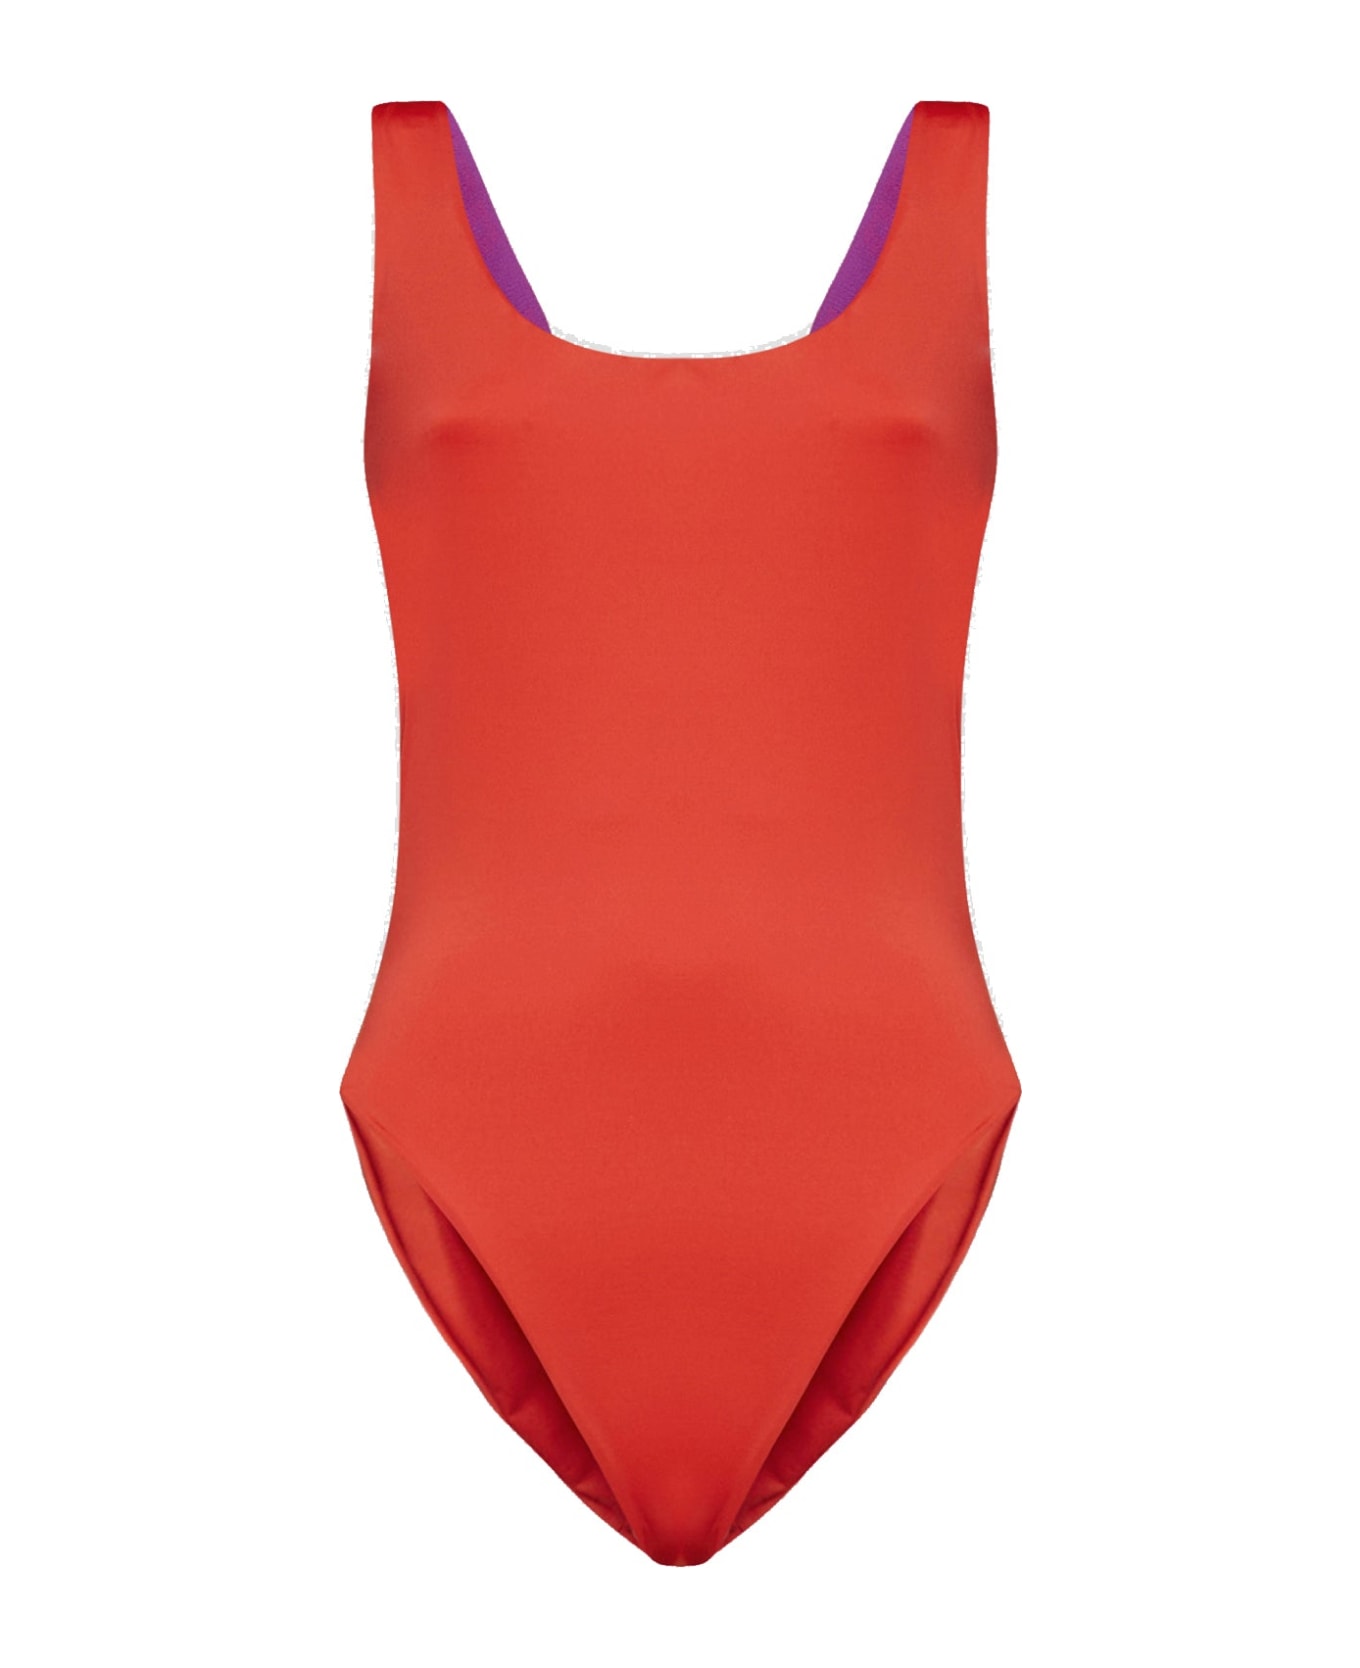 Off-White One-piece Logo Swimsuit - Red 水着